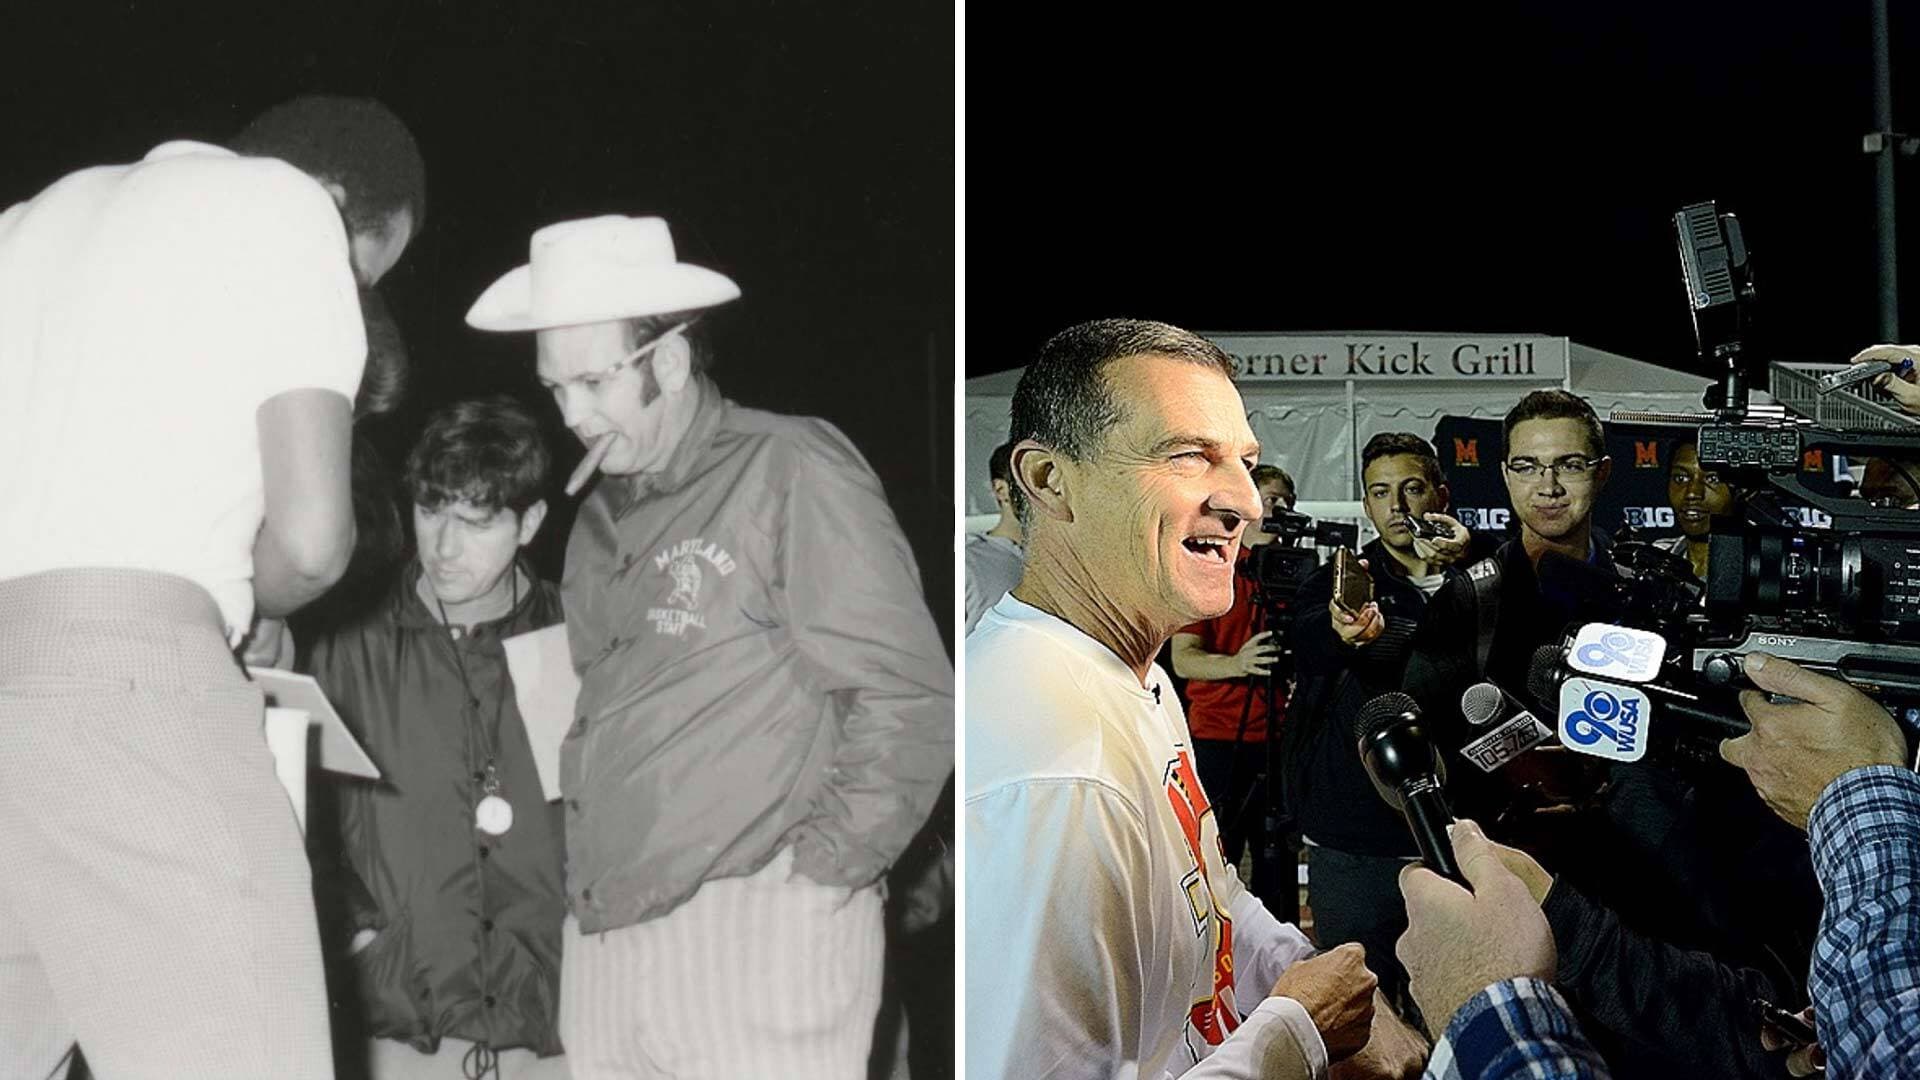 Archival picture of Lefty Driesell next to current picture of Mark Turgeon